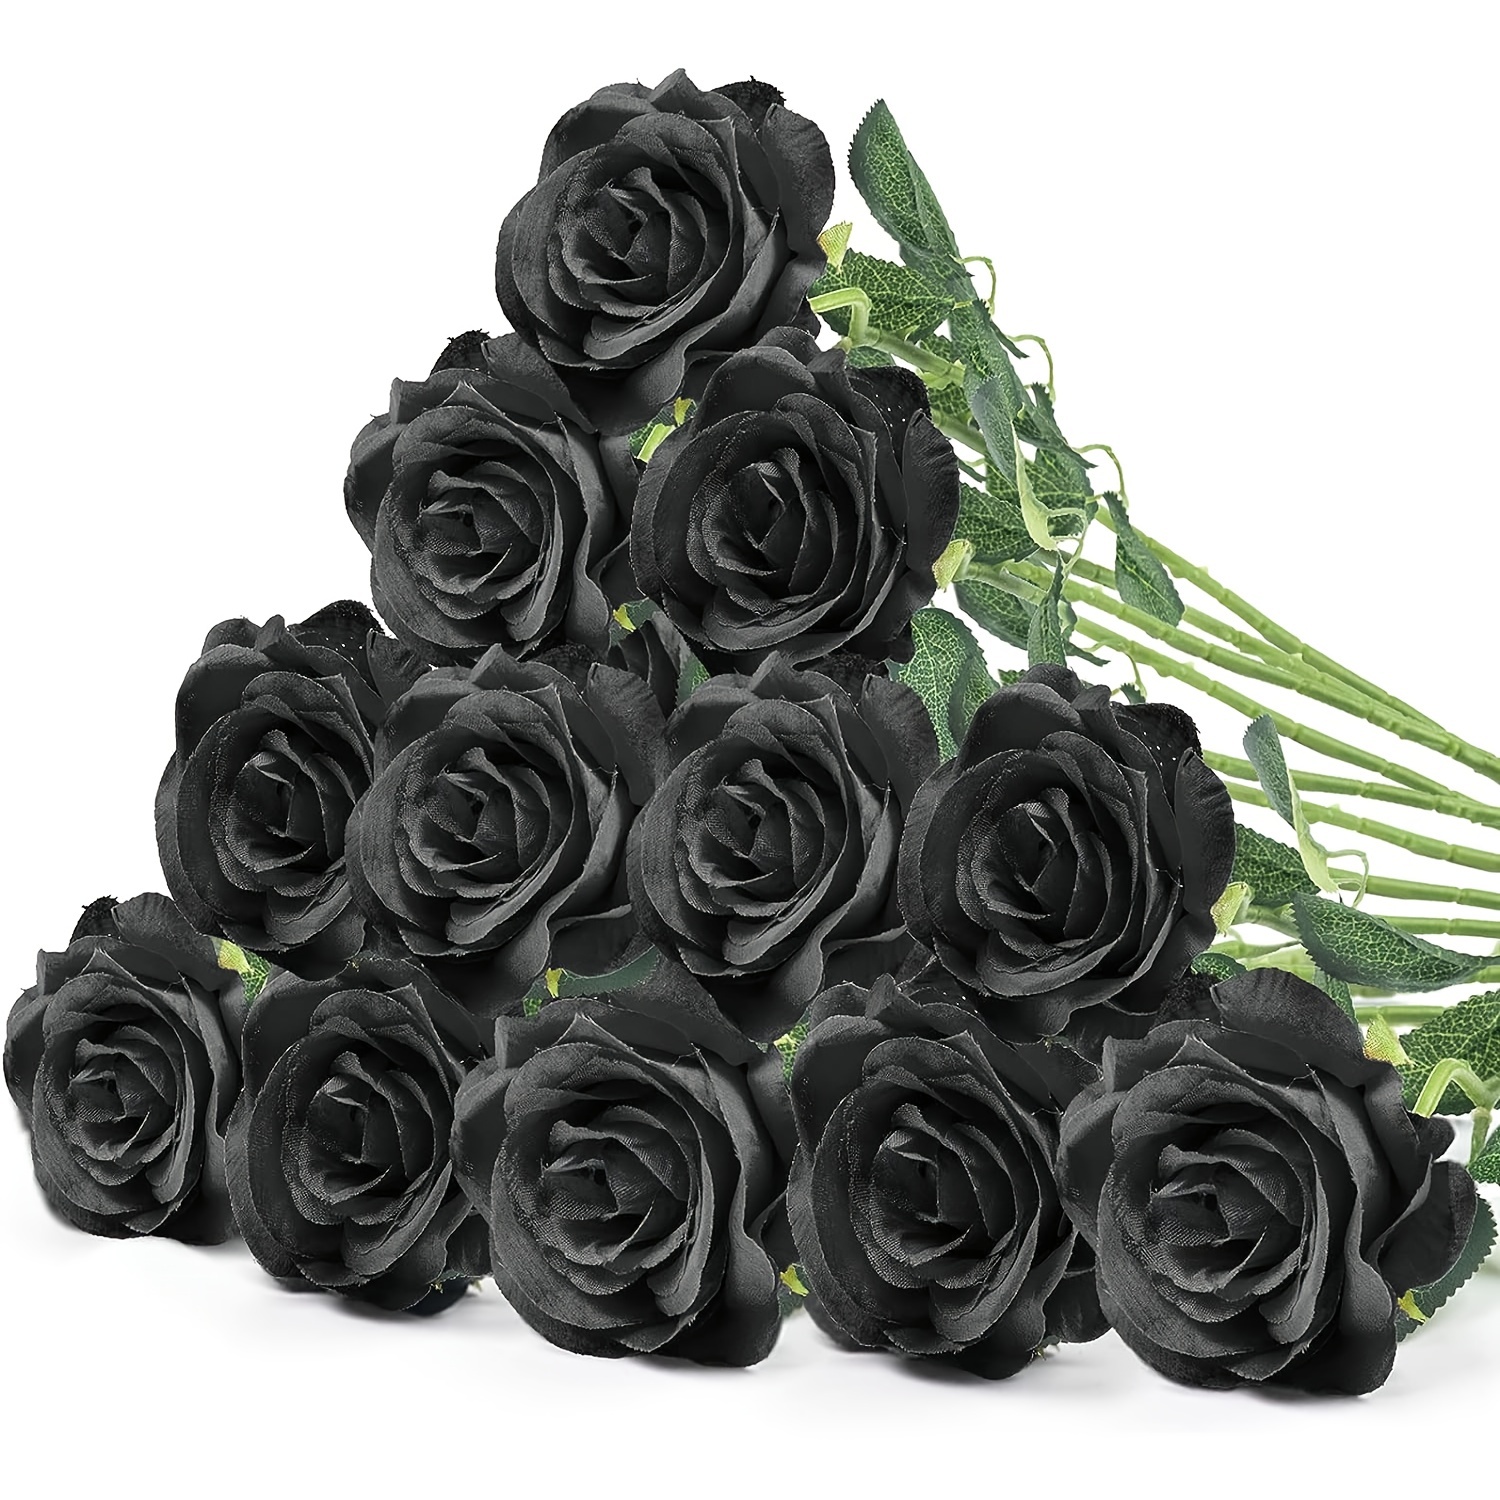 Veryhome Halloween Black Artificial Flowers Silk Black Roses Real Touch  Bridal Wedding Bouquet for Home Garden Party Floral Decor 10 Pcs (Black)